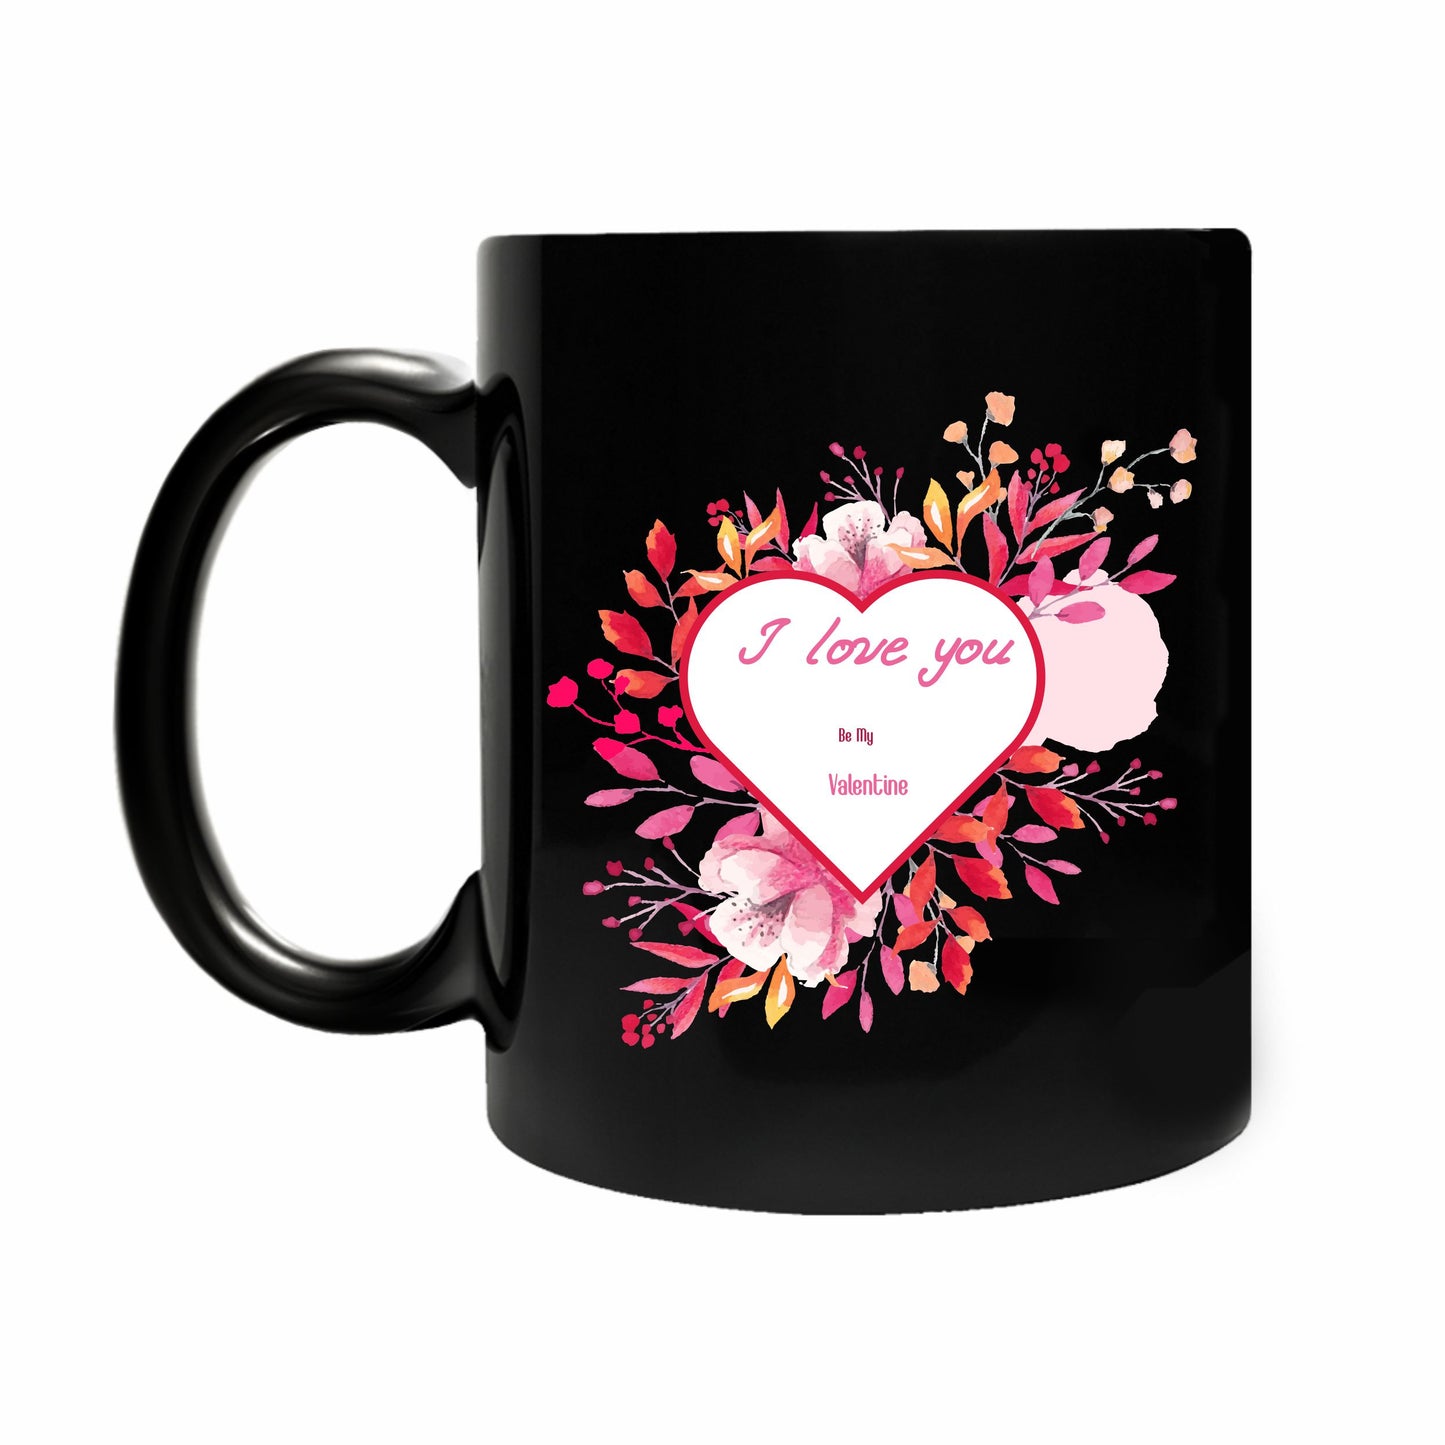 I Love You Valentine's Days Gifts Coffee Mug for your loved ones